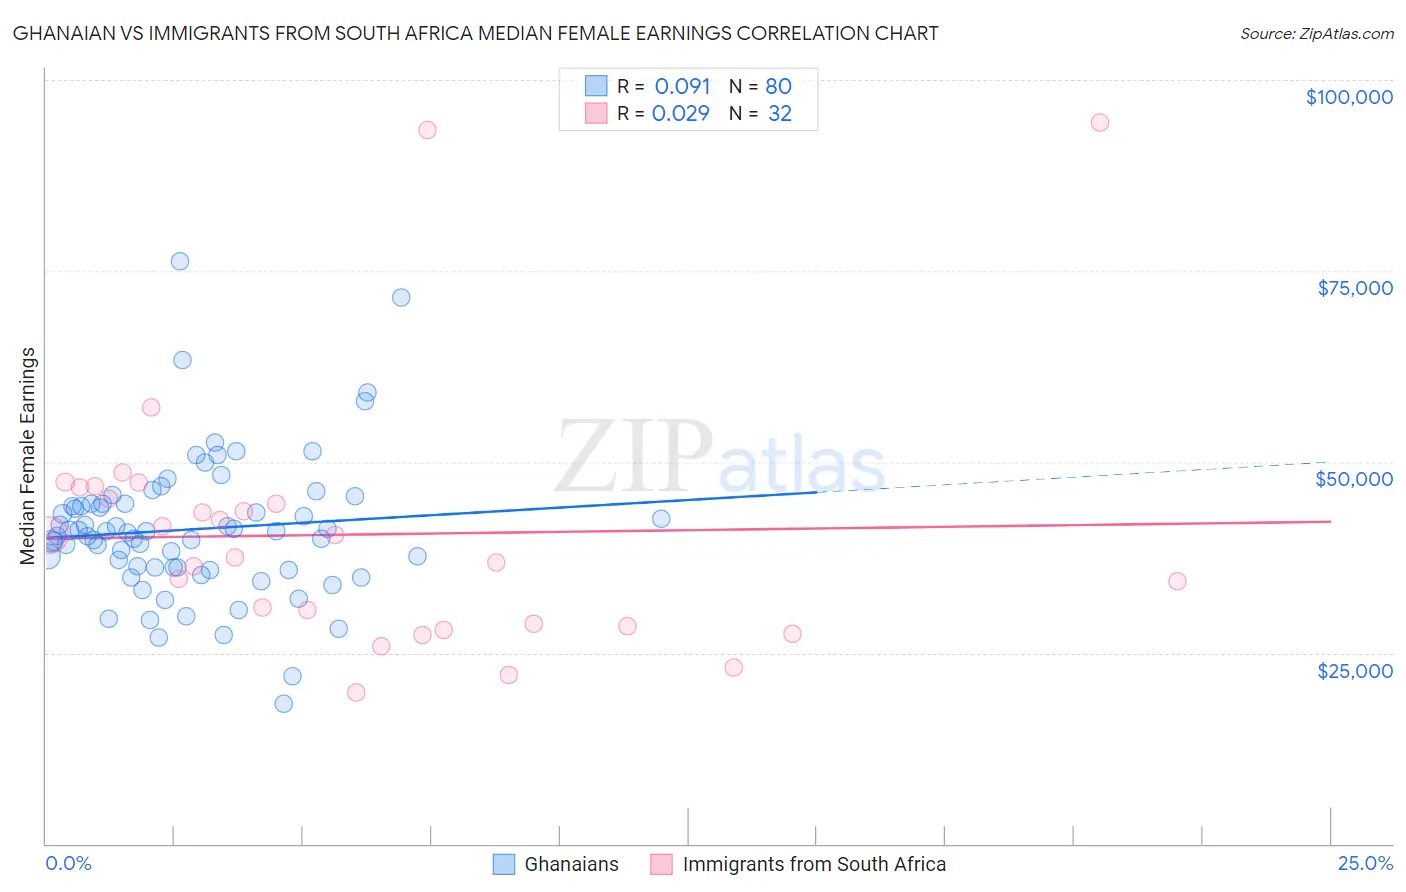 Ghanaian vs Immigrants from South Africa Median Female Earnings